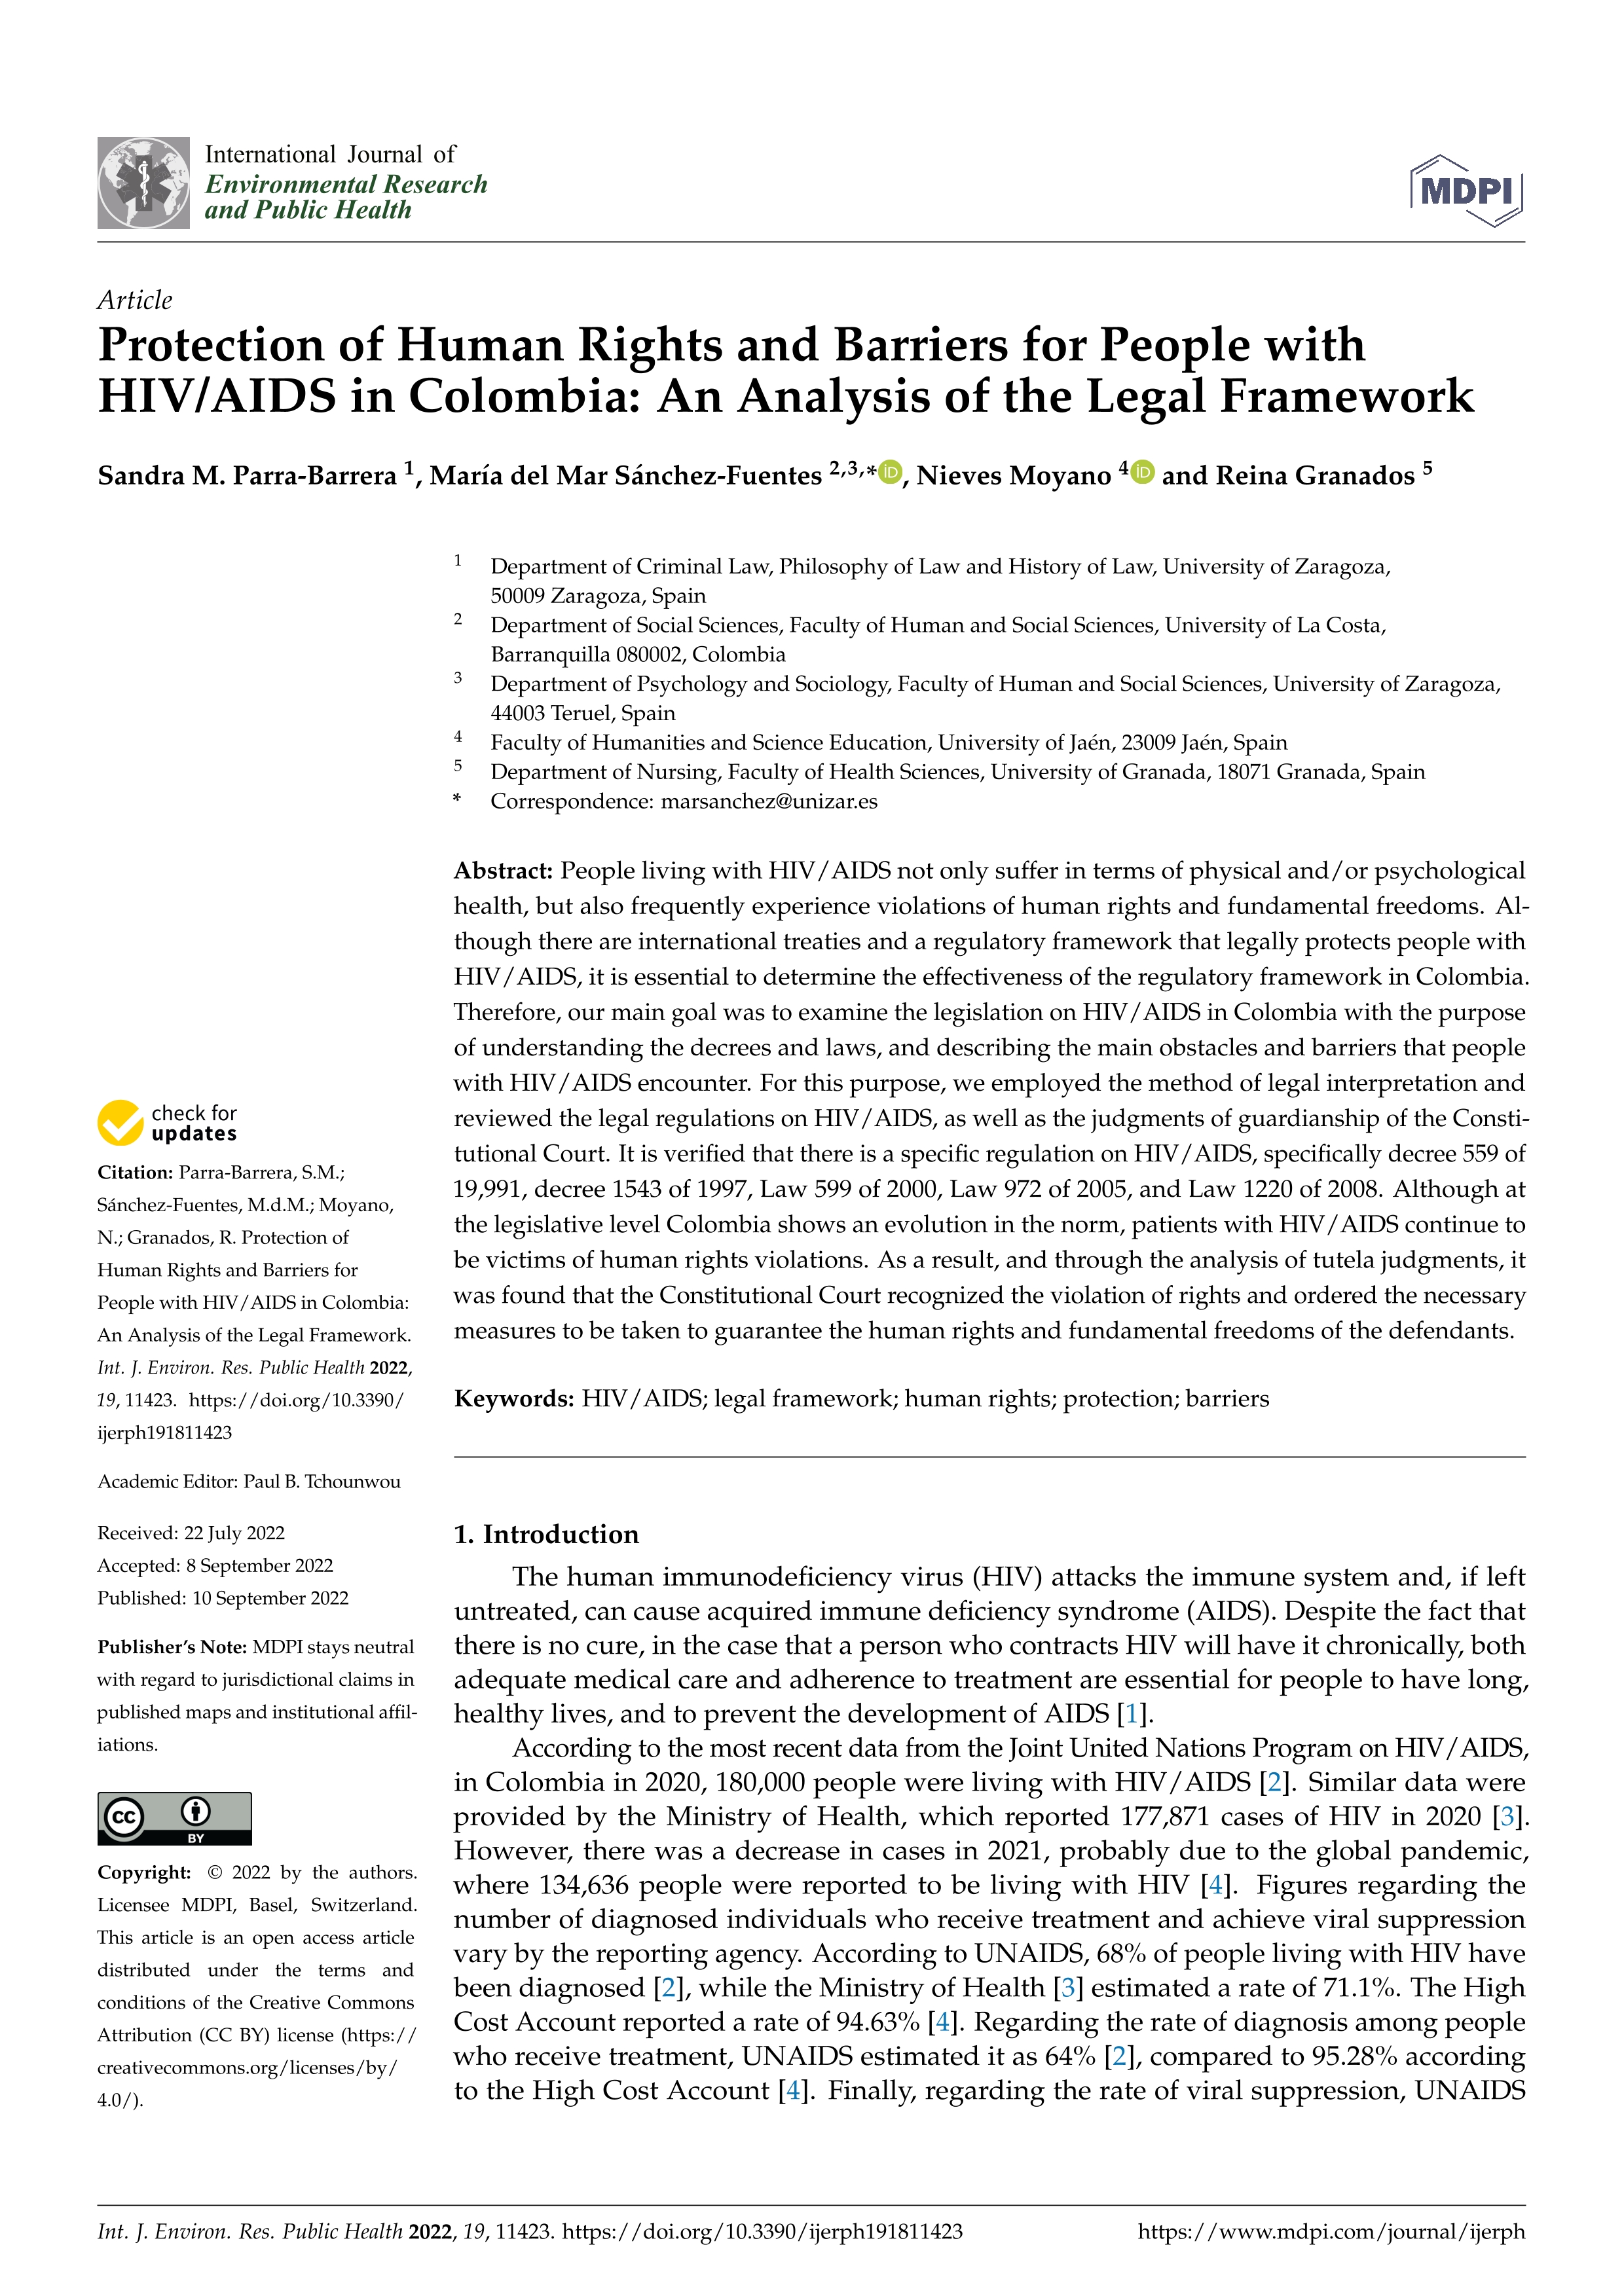 Protection of human rights and barriers for people with HIV/AIDS in colombia: an analysis of the legal framework